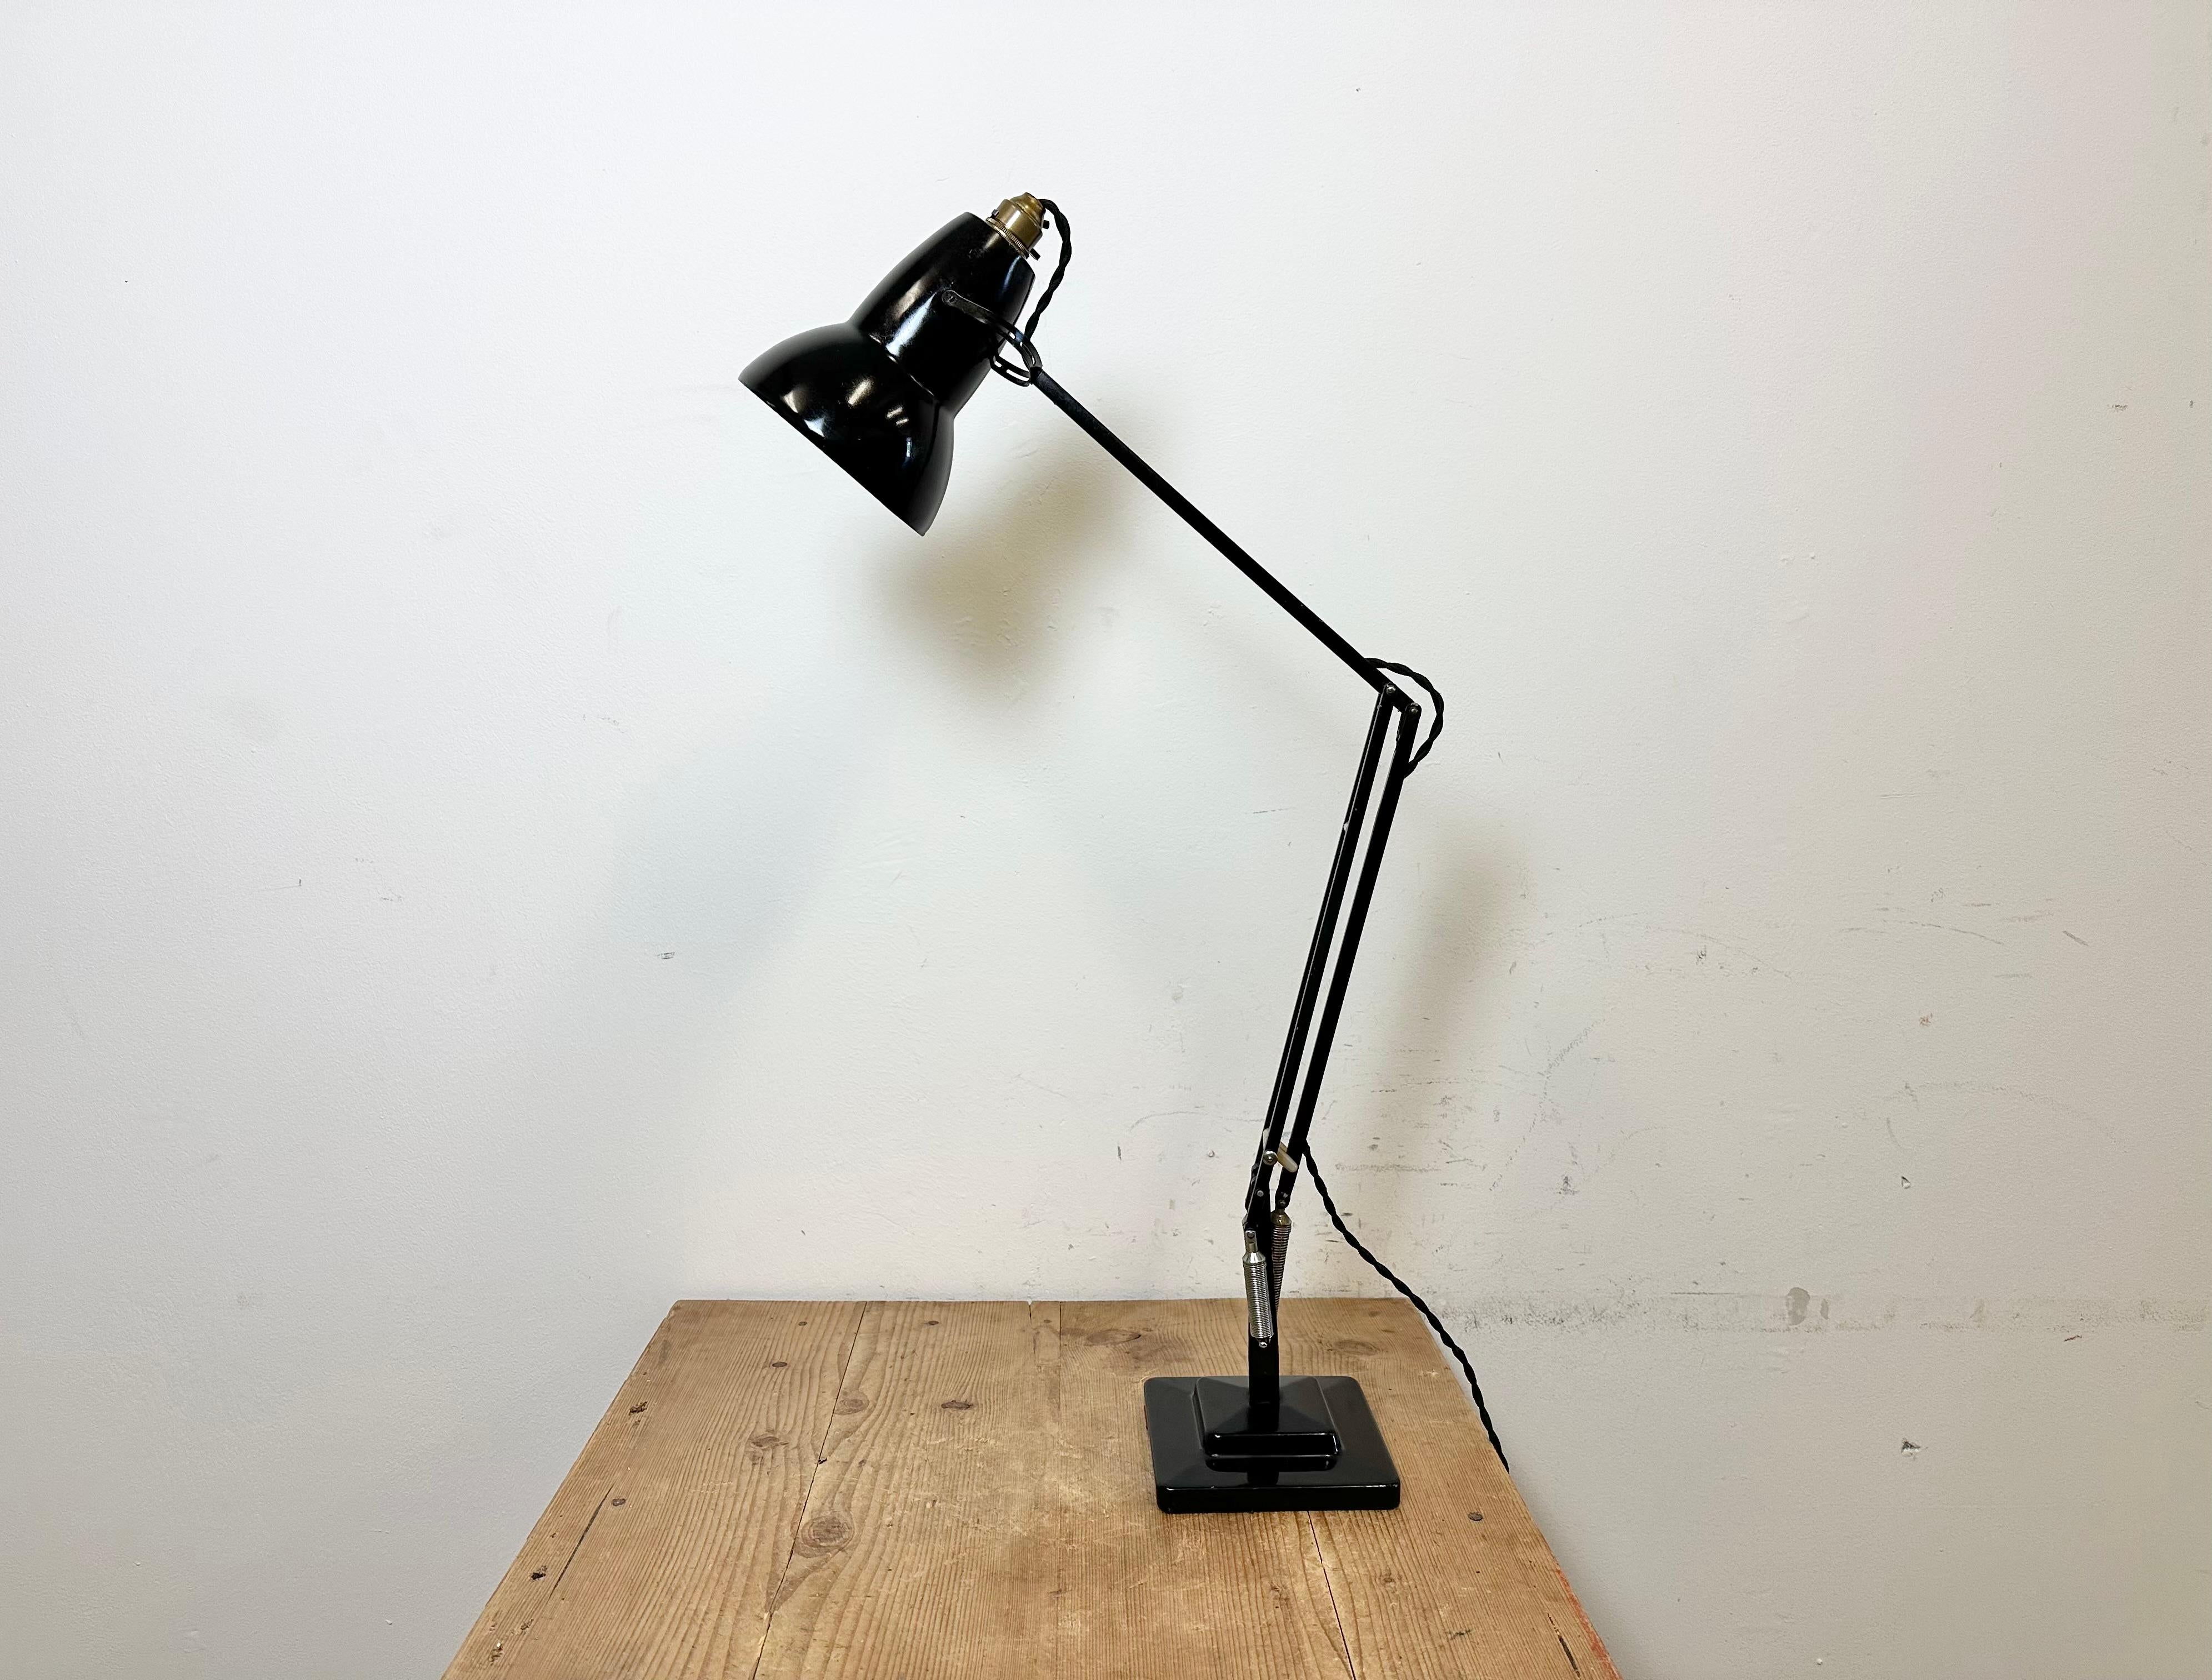 Vintage black anglepoise table lamp designed by George Carwardine and produced by Herbert Terry and Sons in United Kingdom during the 1950s. It features an iron base and arm and an aluminium shade. Original bayonet socket with switch requires